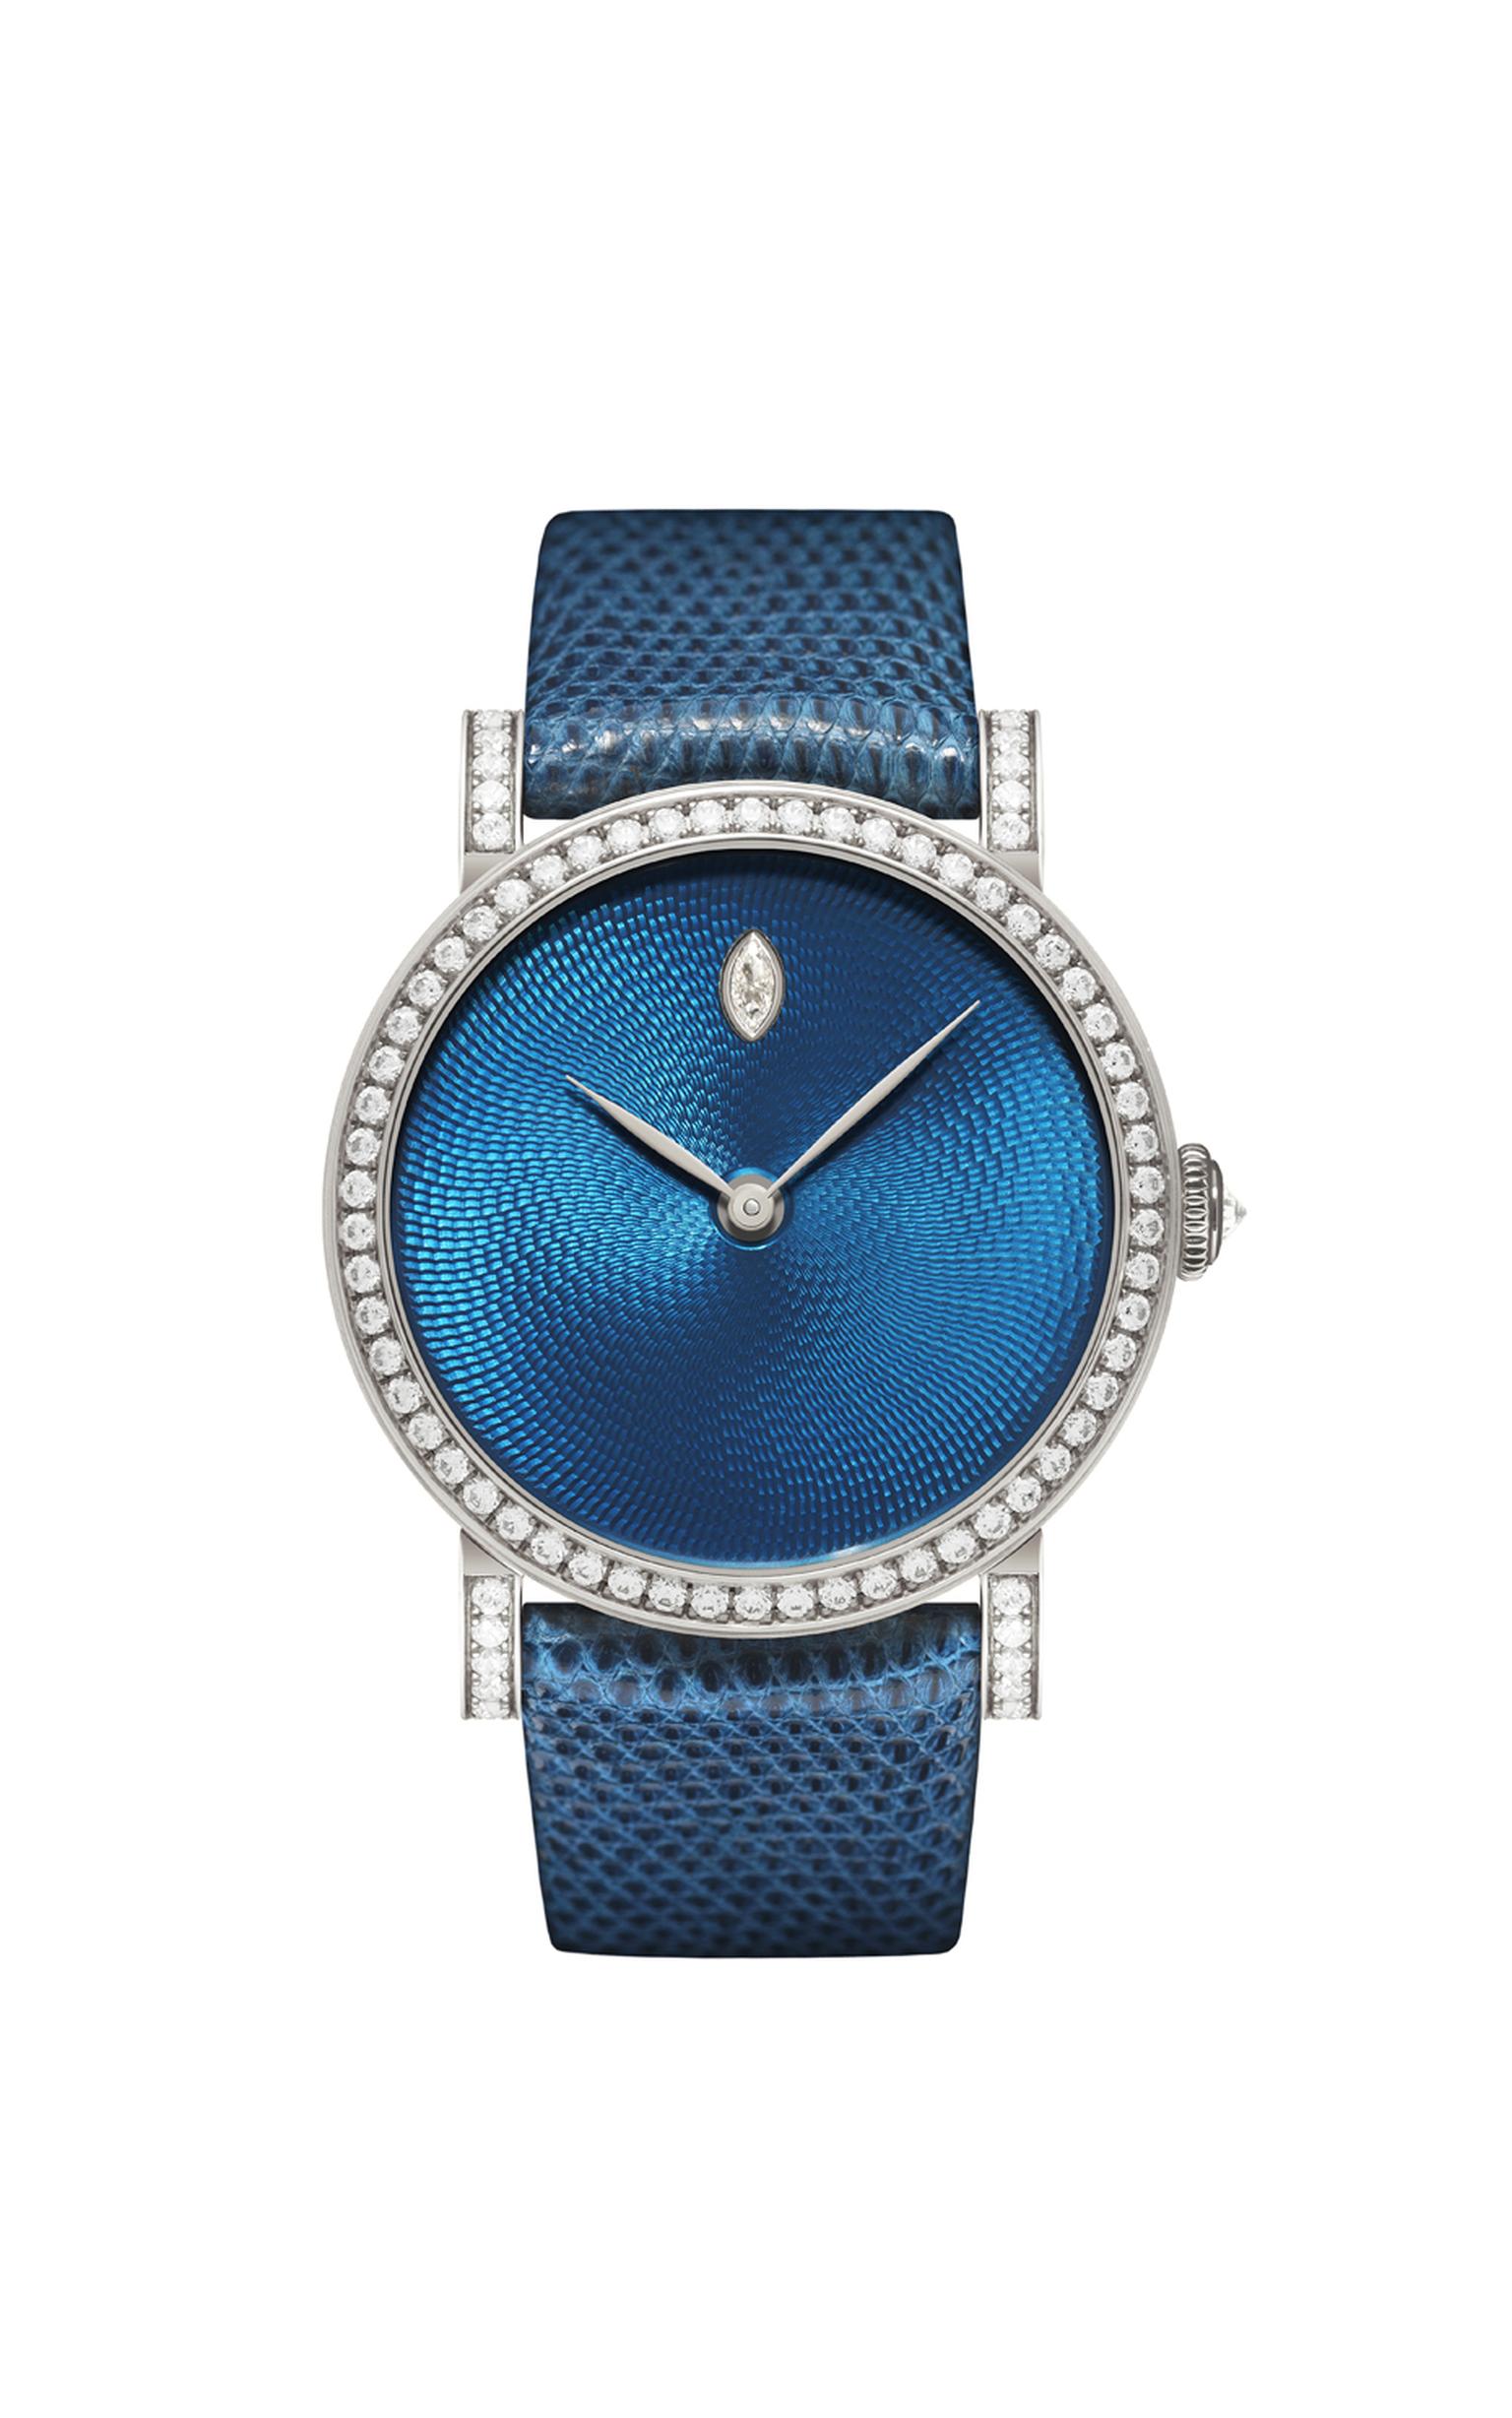 One-of-a-kind DeLaneau Rondo Transluscent Blue watch in white gold with Grand Feu enamel on a Rosette Guilloché dial, set with diamonds on the bezel, crown and buckle.